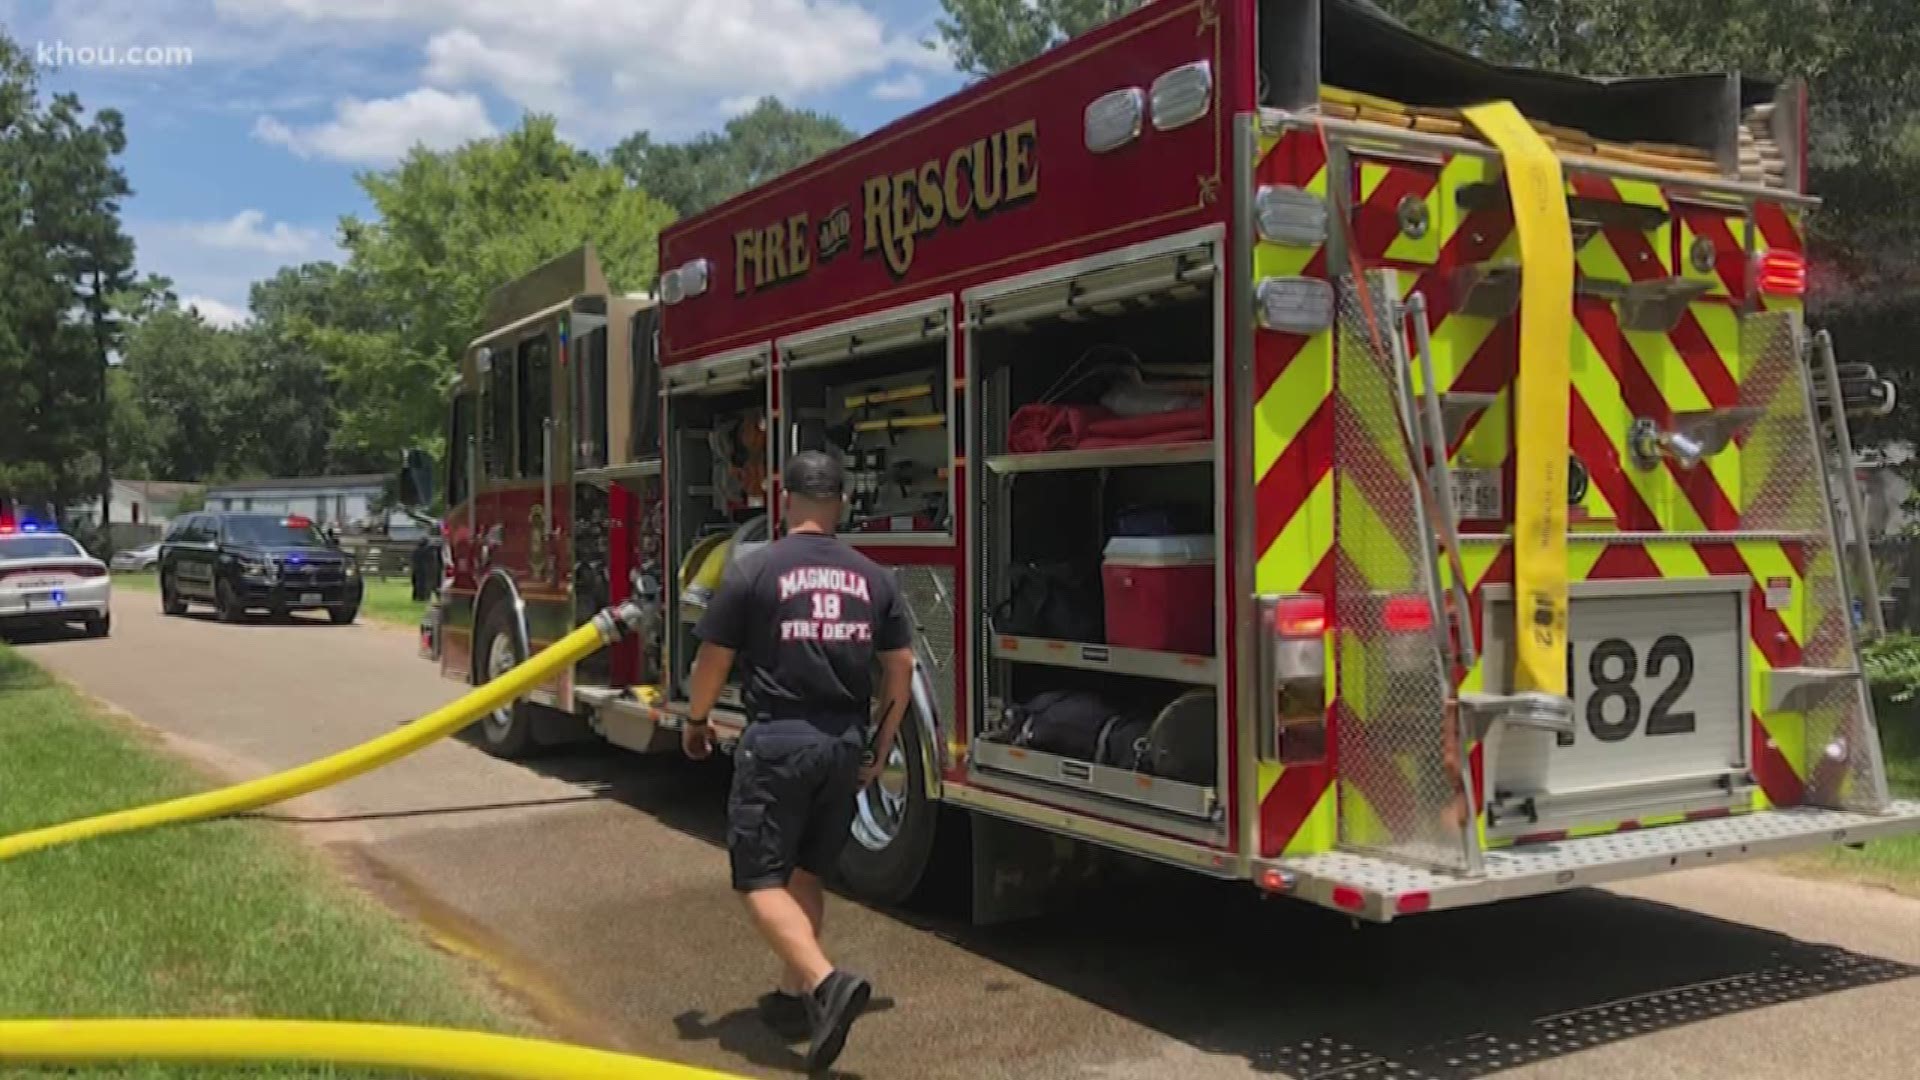 Magnolia firefighters saved three dogs in a house fire Saturday. Firefighters used pet oxygen masks to help resuscitate the dogs from smoke inhalation.